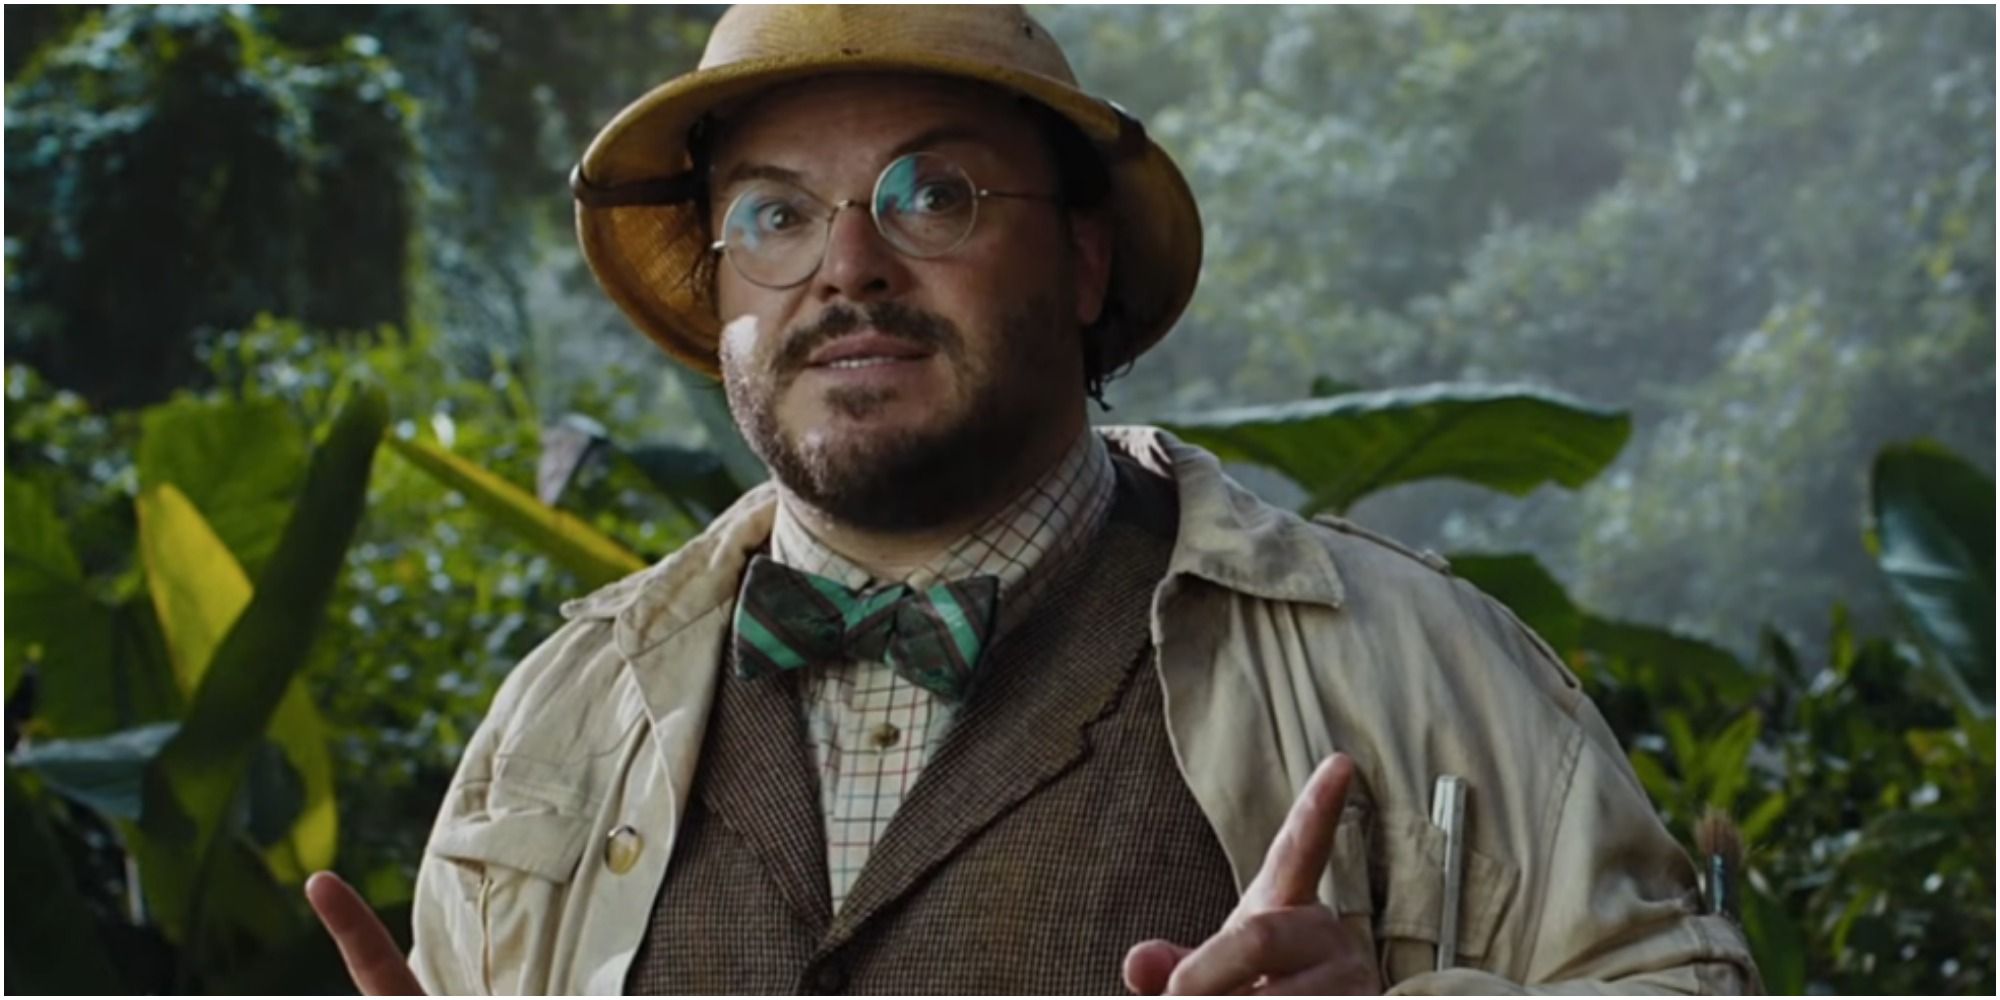 A screenshot of Jack Black's Shelley Oberon after being dropped in the videogame in Jumanji: Welcome to the Jungle